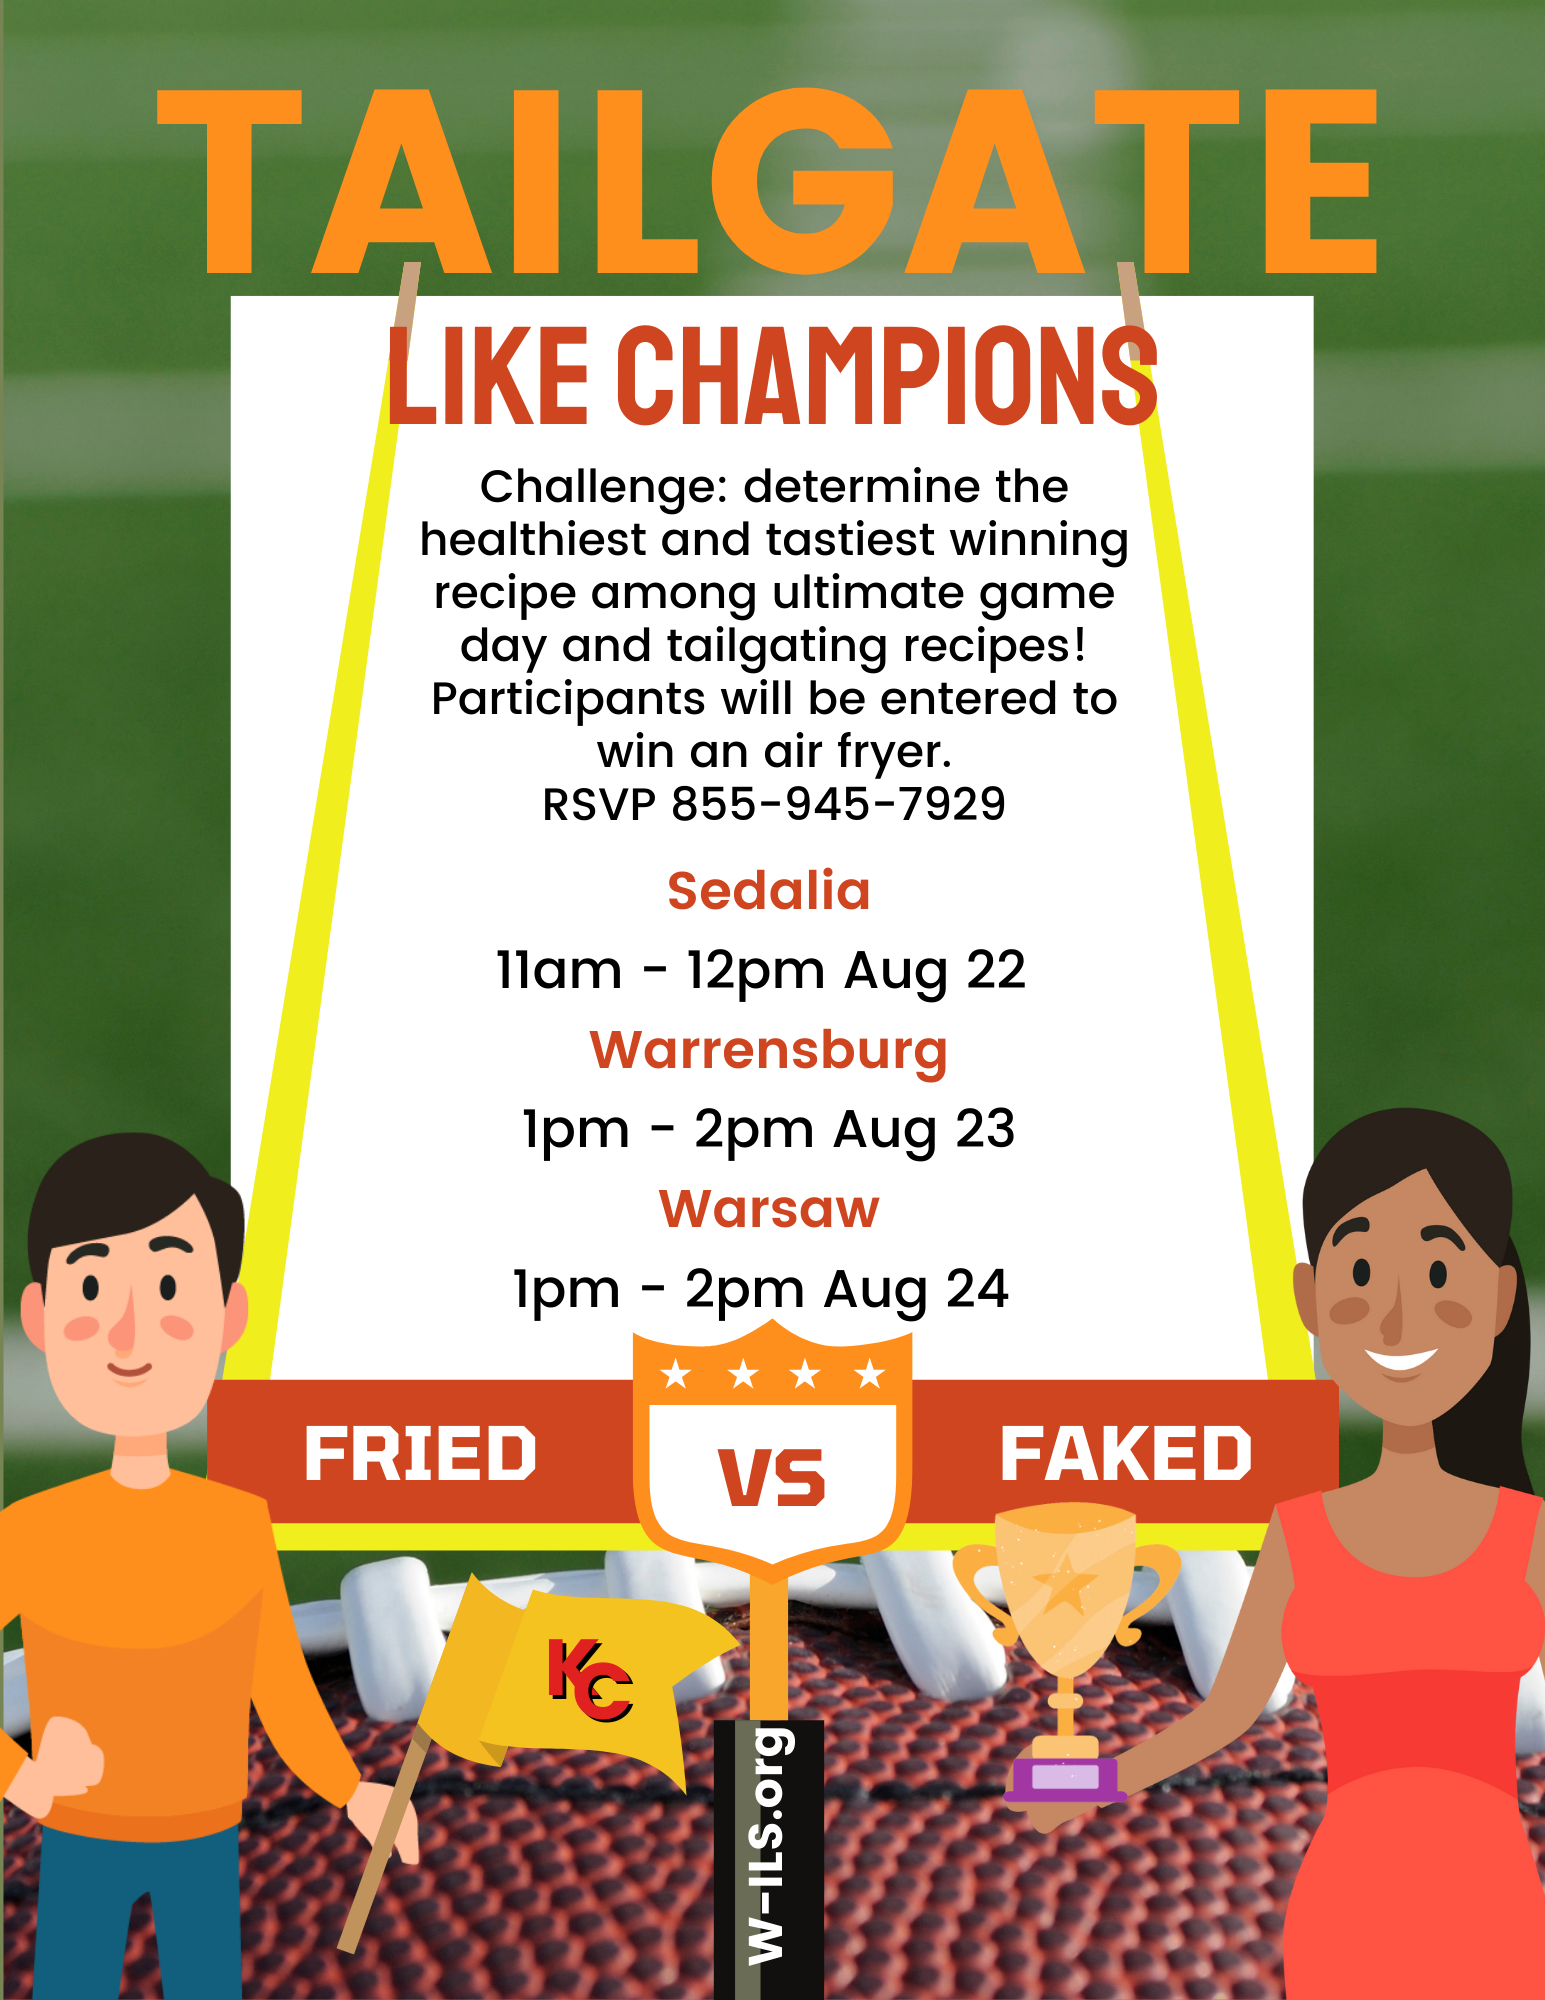 Challenge: determine the healthiest and tastiest winning recipe among ultimate game day and tailgating recipes! Participants will be entered to win an air fryer. RSVP 855-945-7929